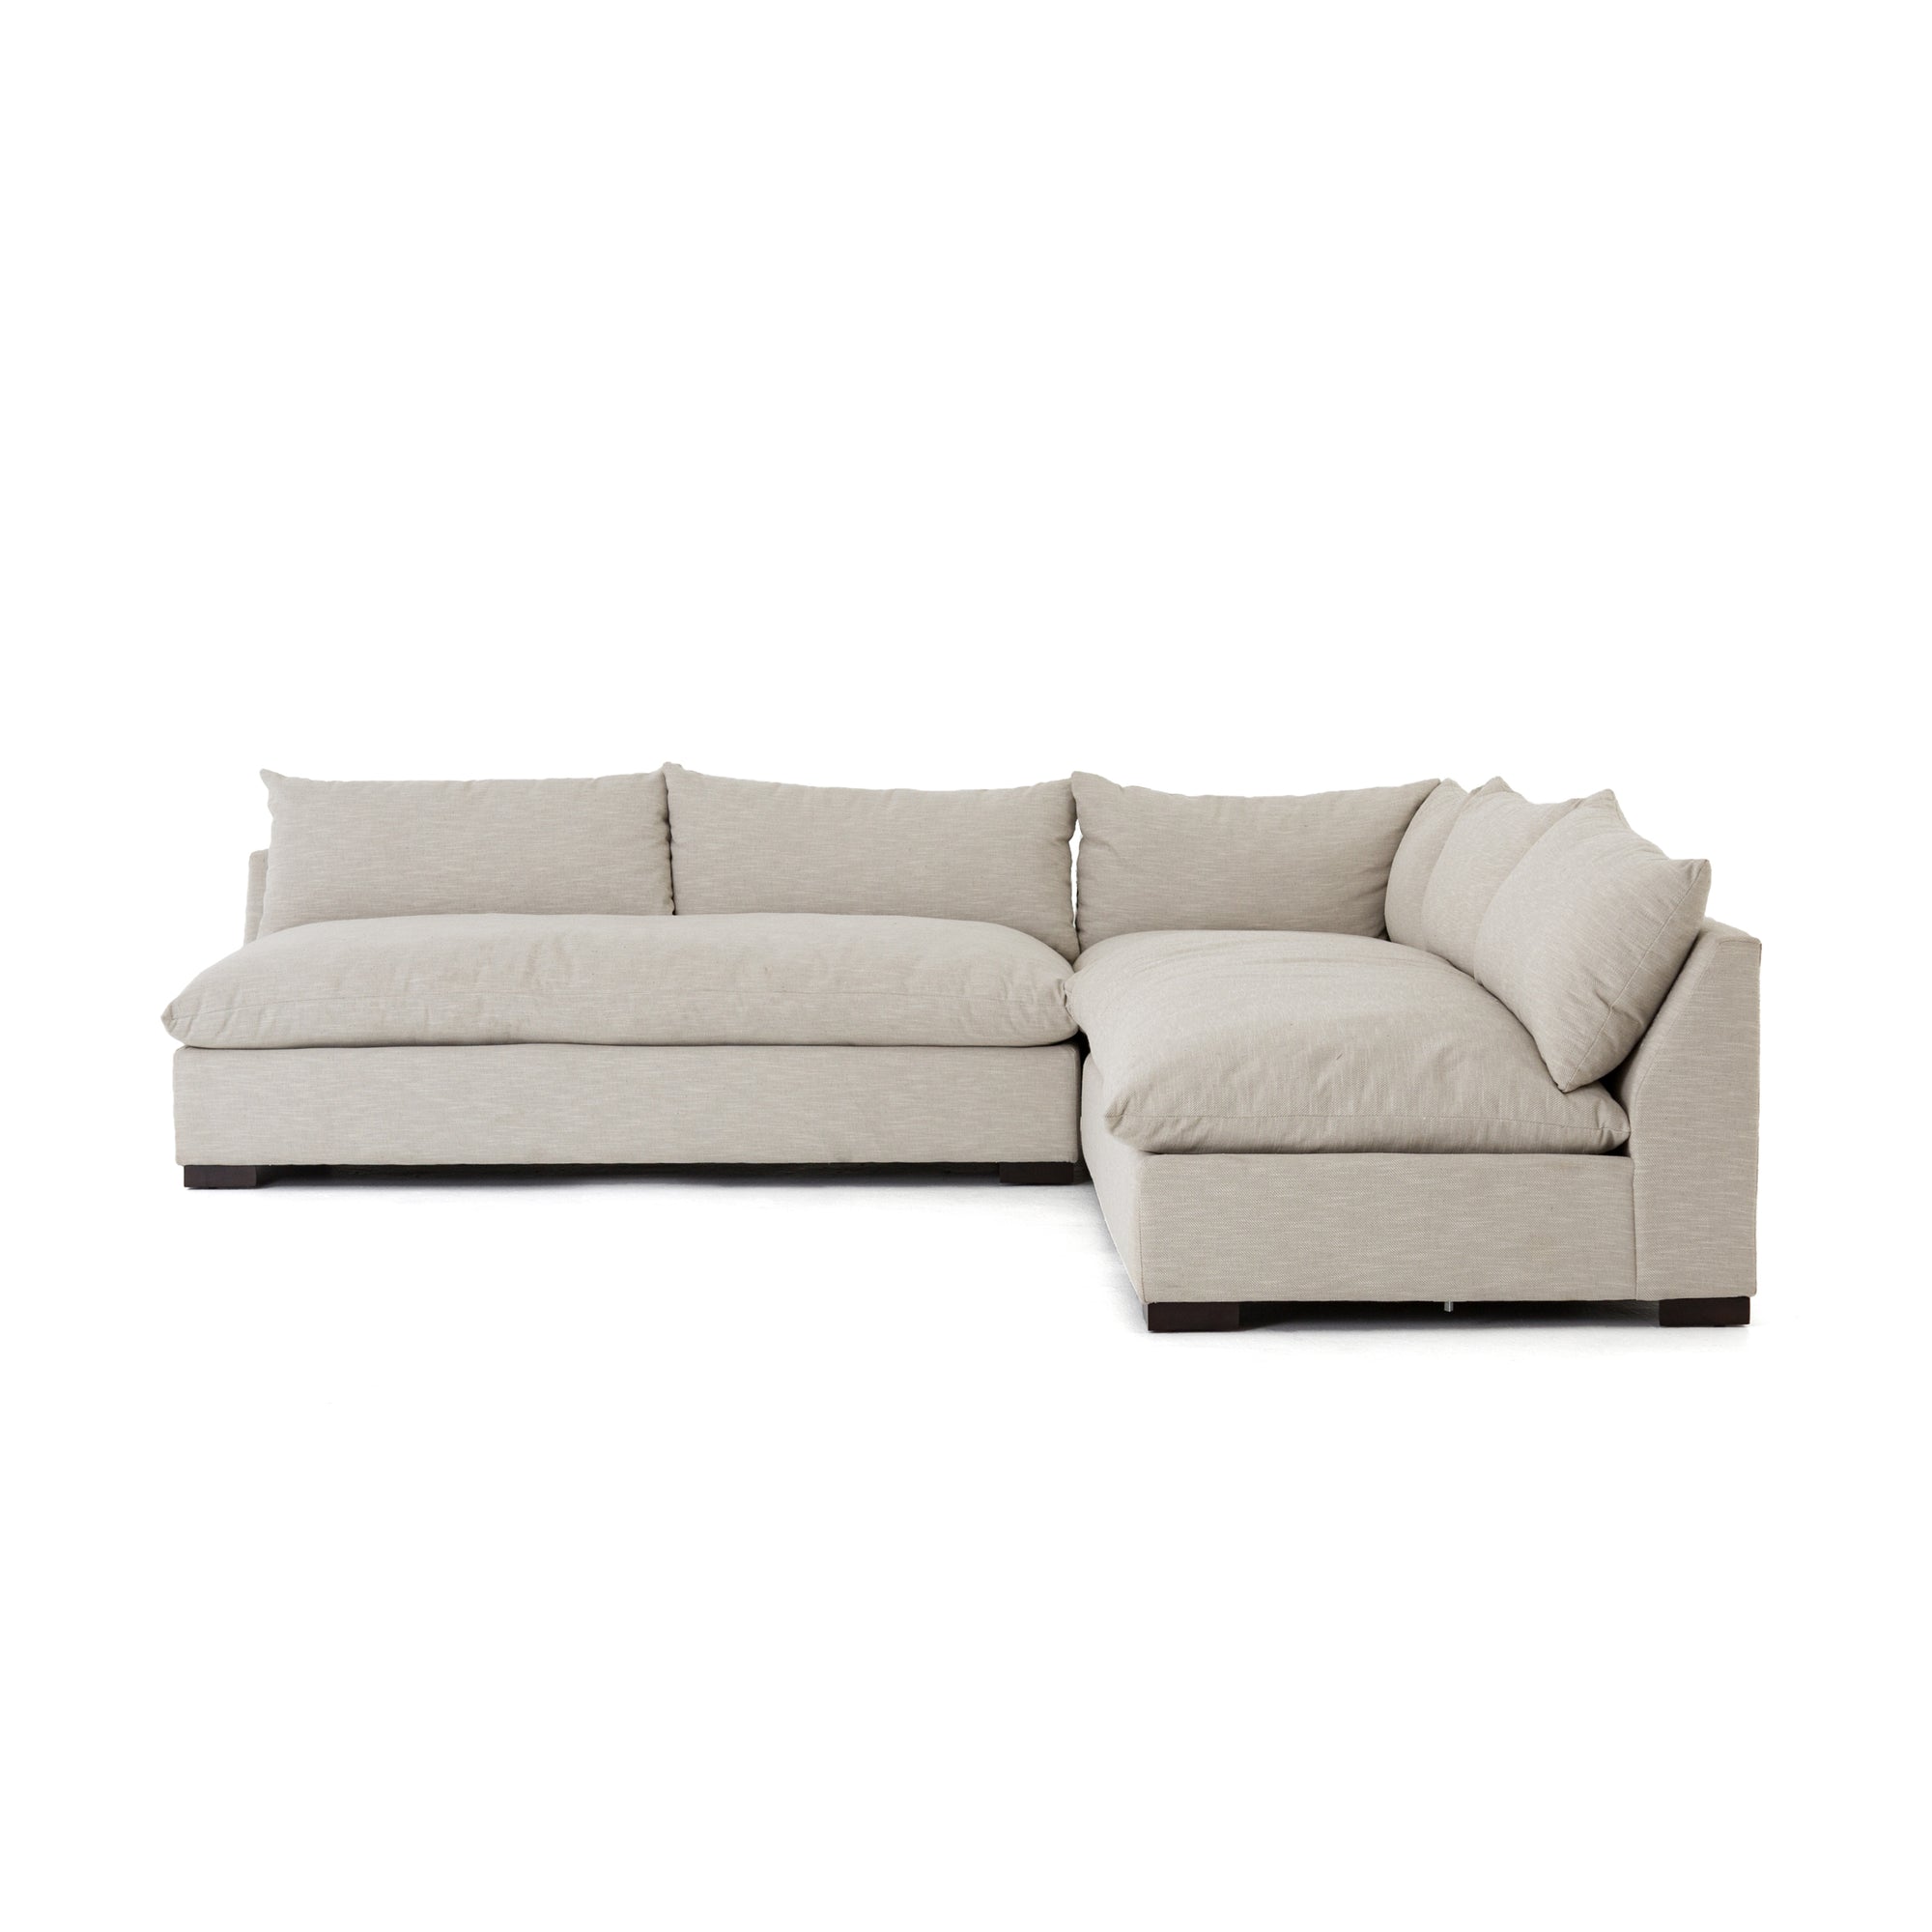 Grace 3 Piece Sectional Sofa - Rug & Weave